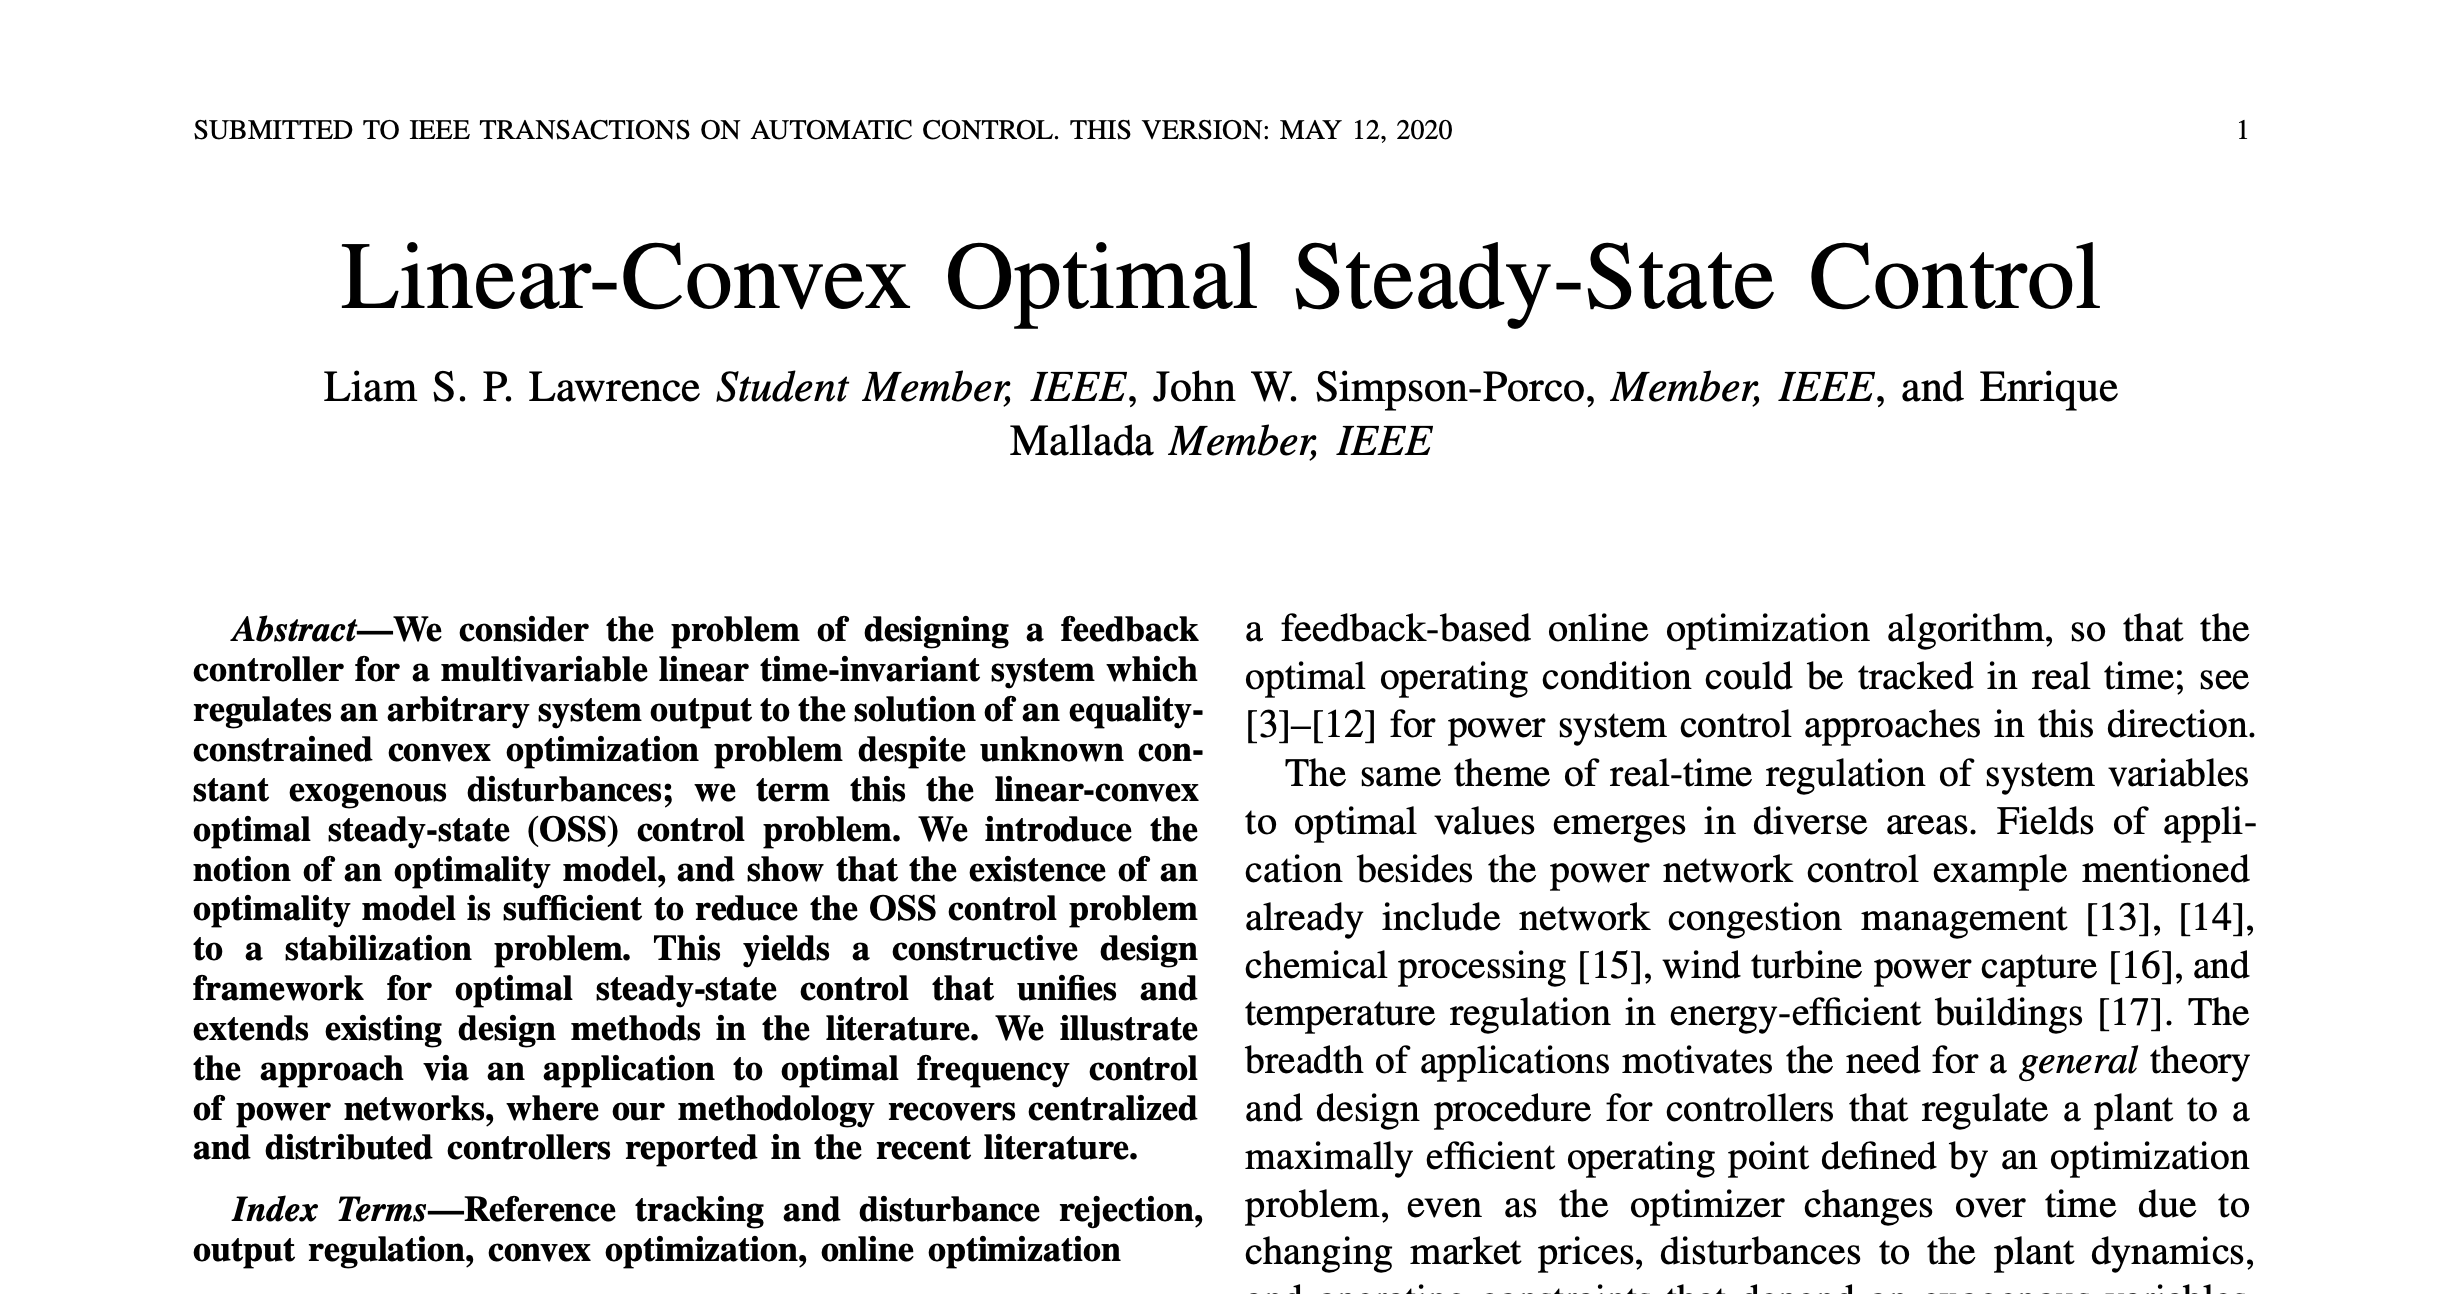 Optimal Steady-State Control